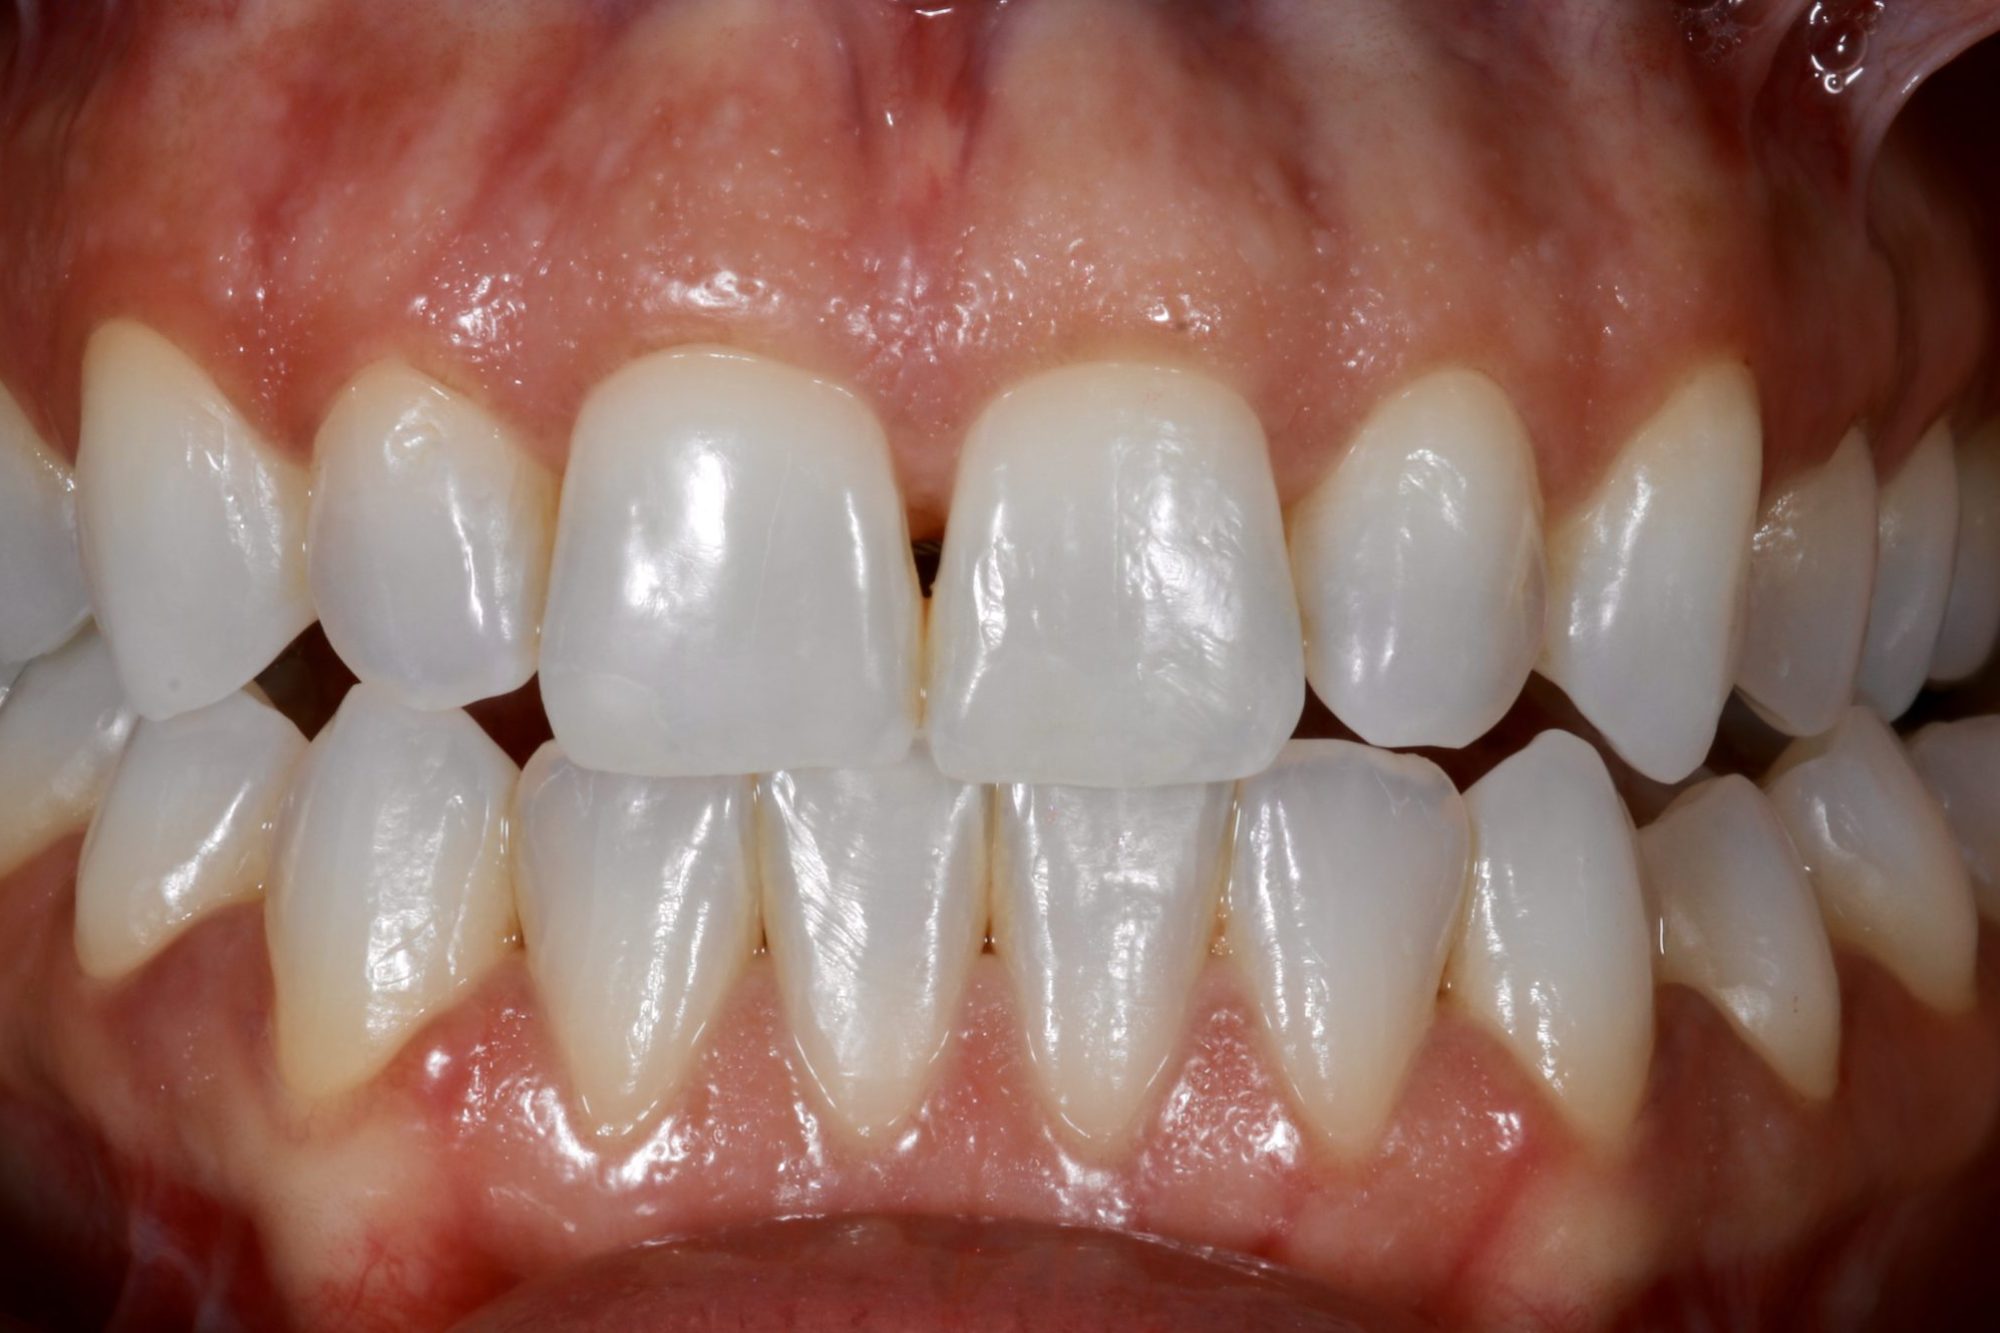 Nishan Dixit describes a minimally invasive alignment, bleaching and edge-bonding case in which the patient was ‘elated and confident’ after their smile transformation.